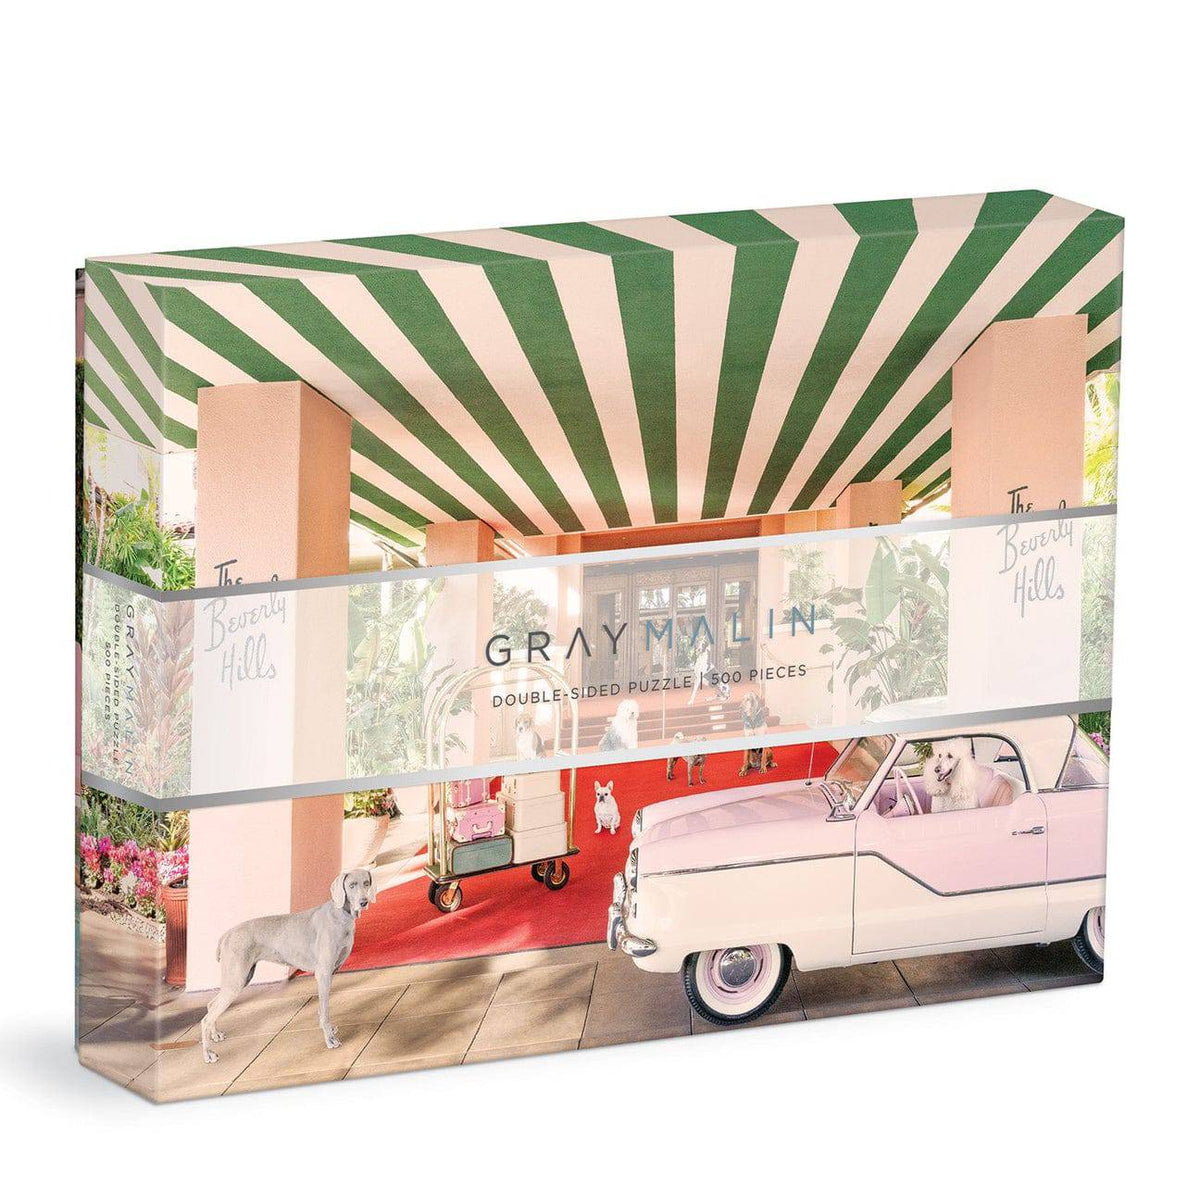 Gray Malin The Dogs at the Beverly Hills Hotel 500 Piece Double-Sided Puzzle - The Preppy Bunny